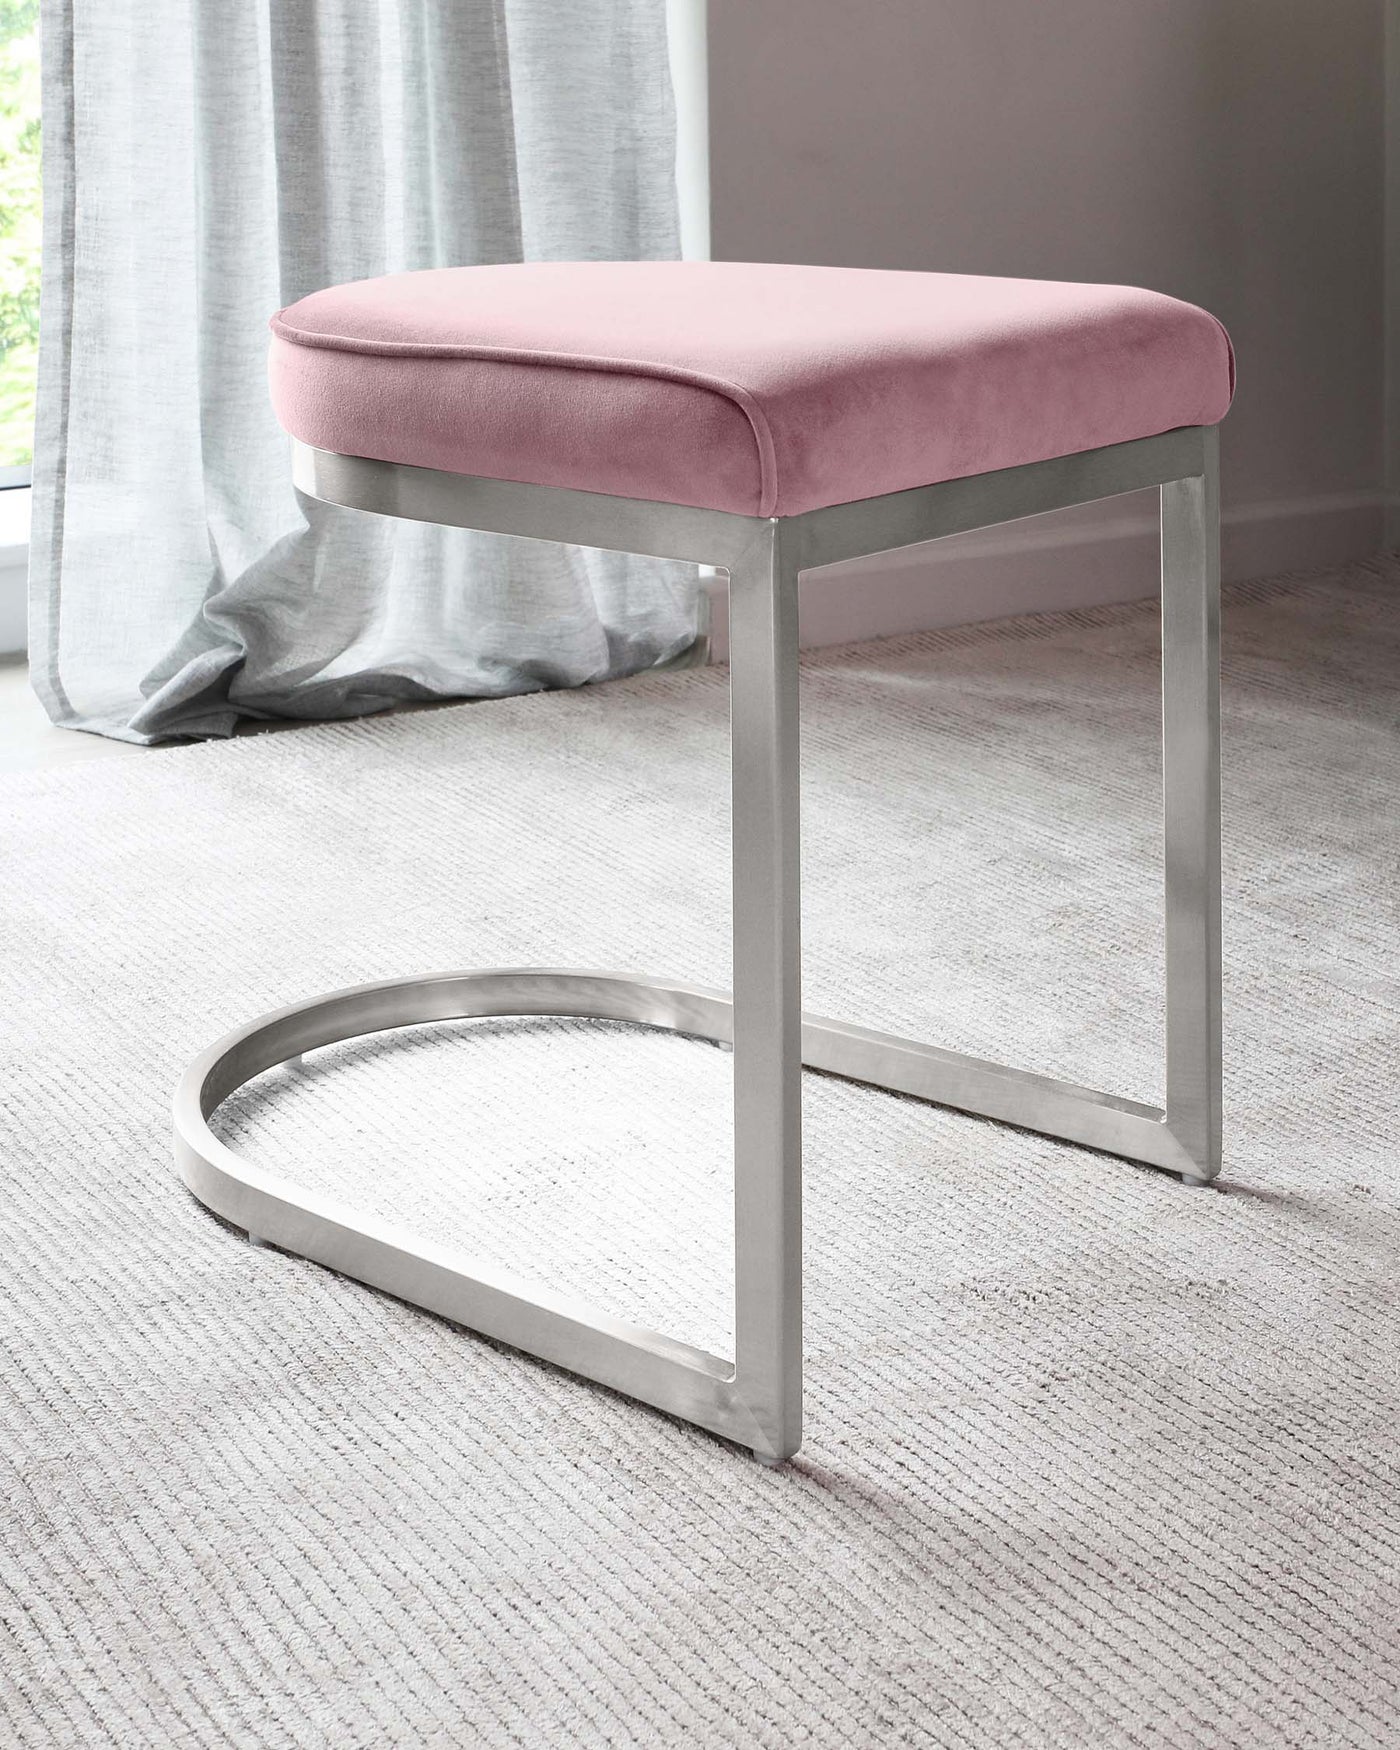 Modern minimalist stool with a plush pink upholstered top and sleek, chrome-finished metal base. The base features a simple rectangular frame with a single horizontal support bar that doubles as a footrest. The stool is set against a neutral-toned carpeted floor, complementing light-flowing curtains in the background.